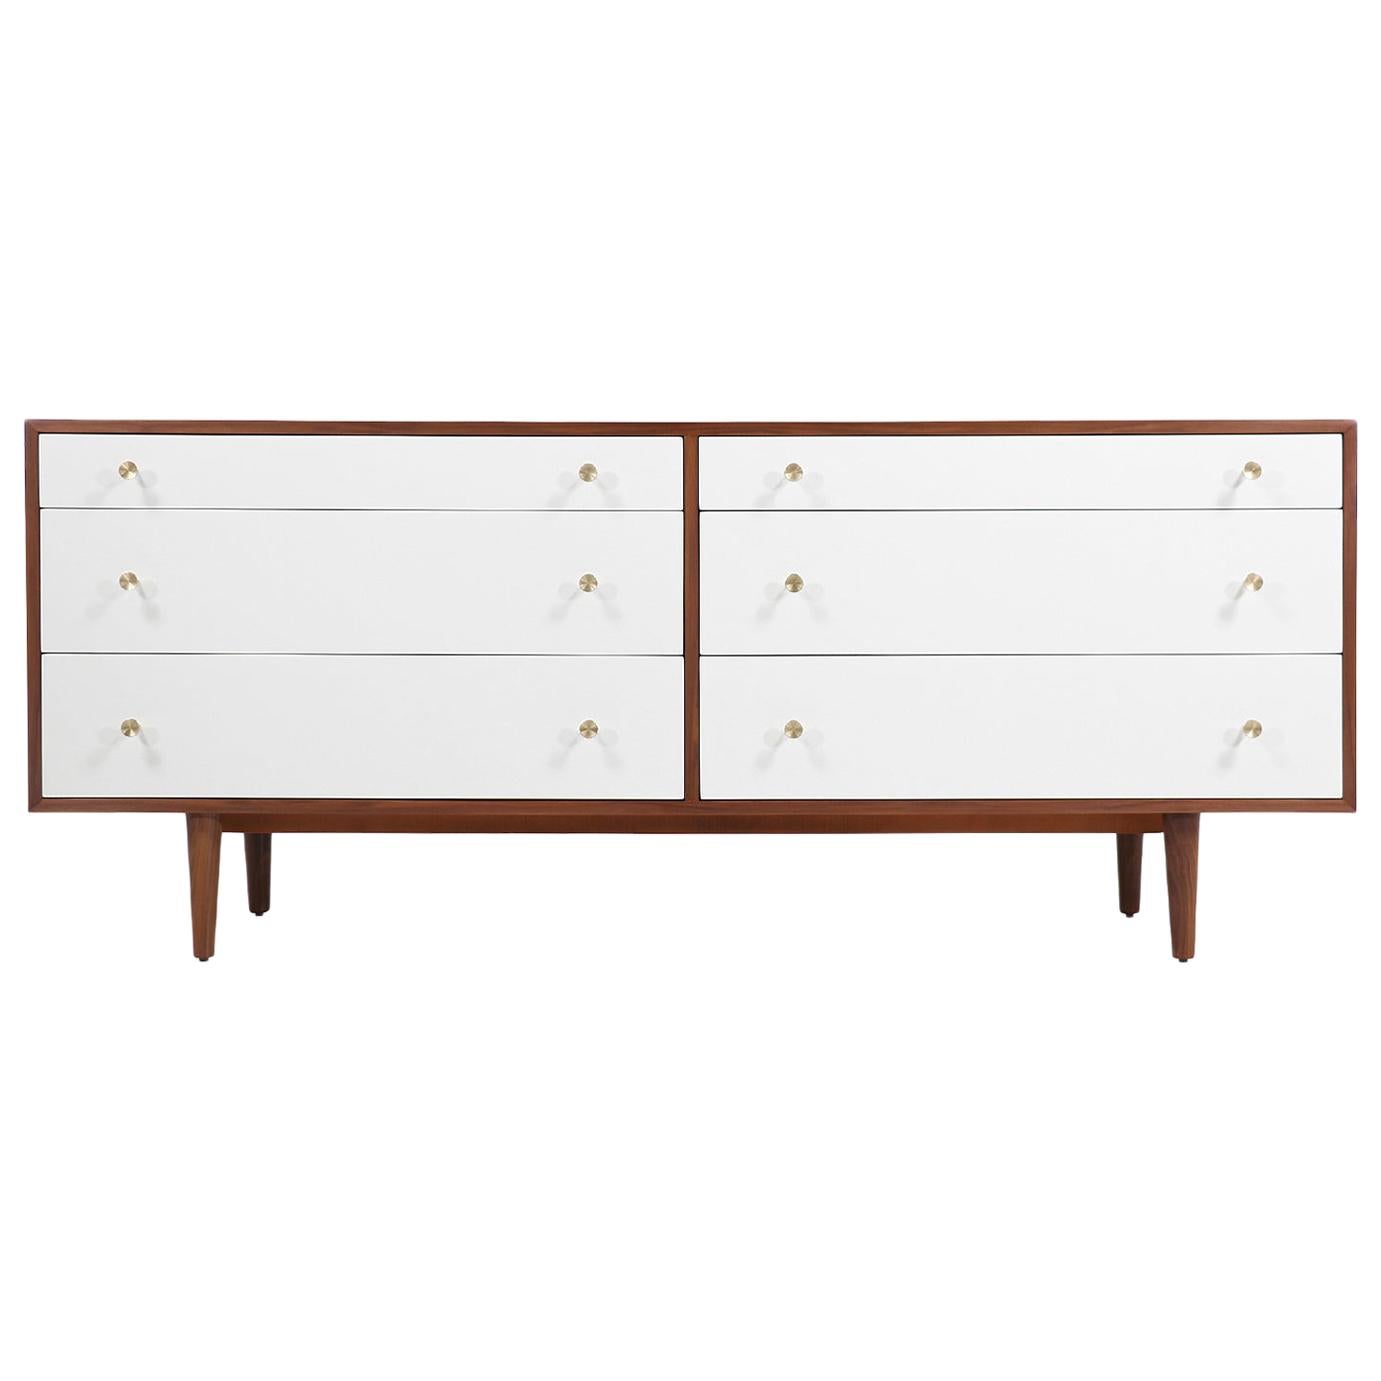 Milo Baughman Two-Tone Walnut and Lacquered Dresser for Glenn of California